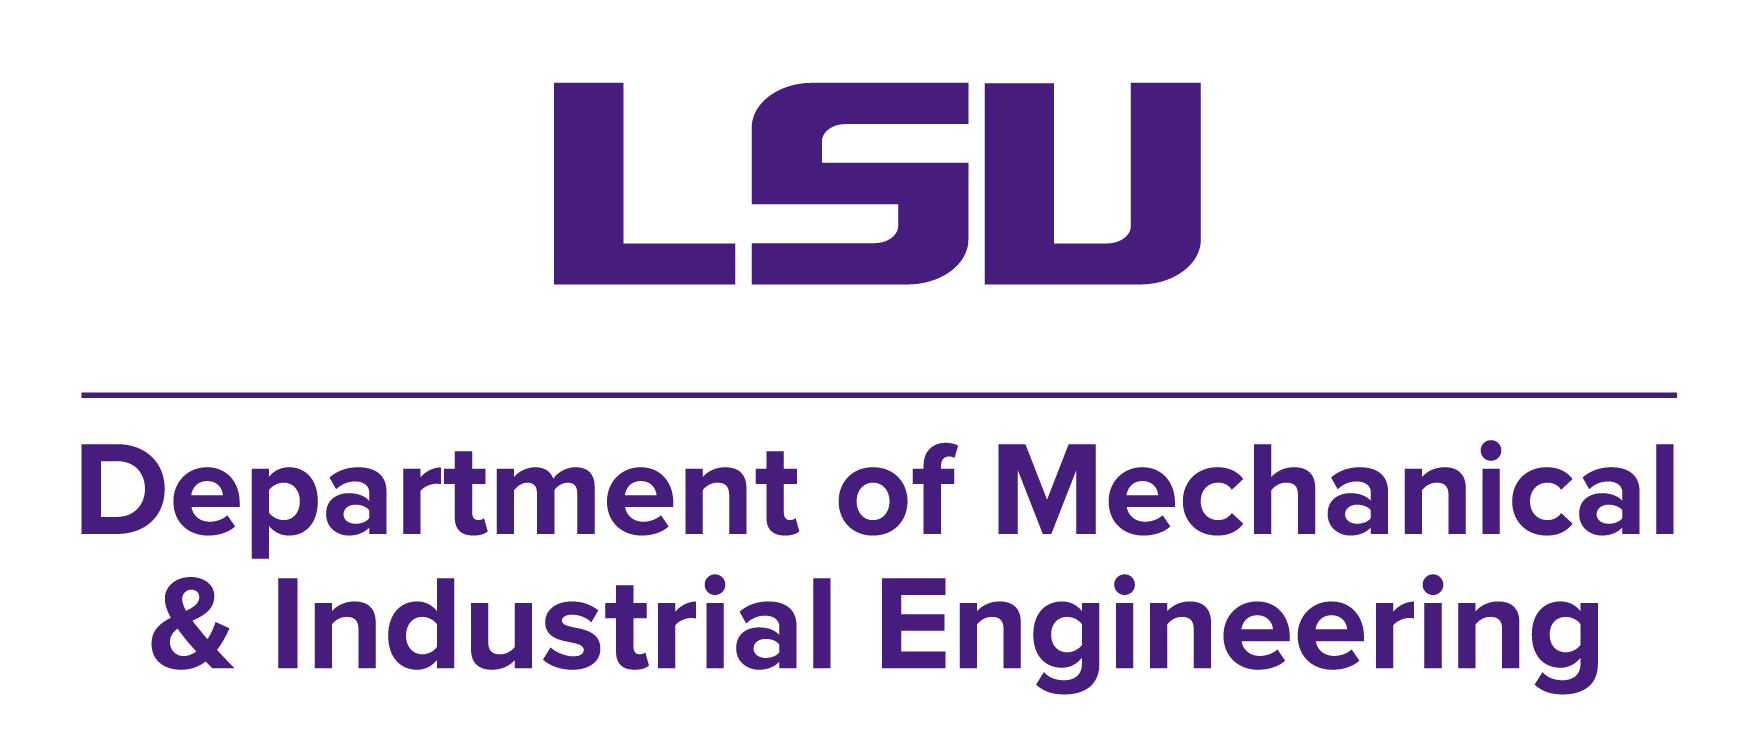 Louisiana State University Department of Mechanical and Industrial Engineering